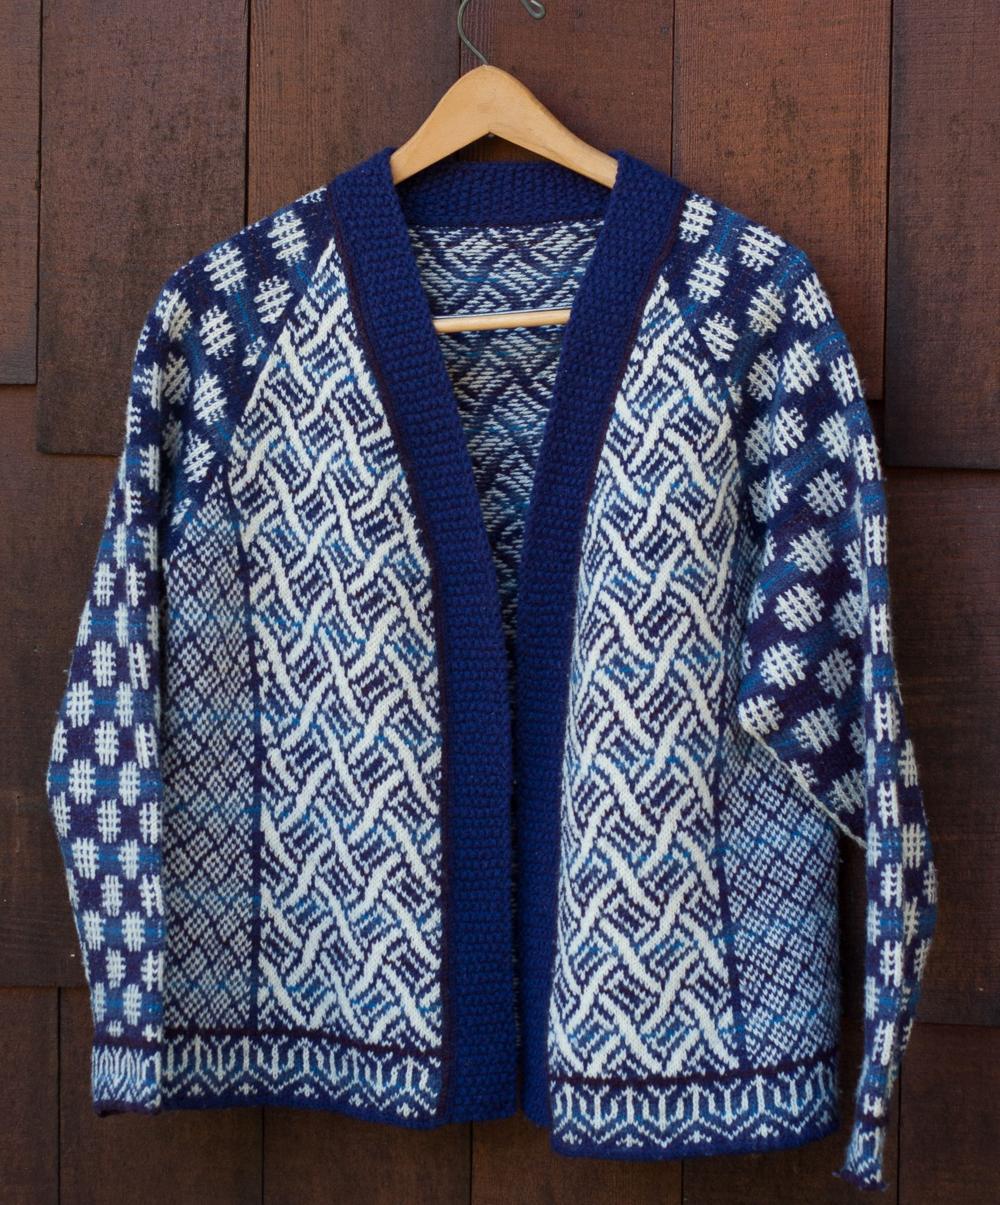 Sashiko-stitch-inspired sweater created using methods in The Joy of Color